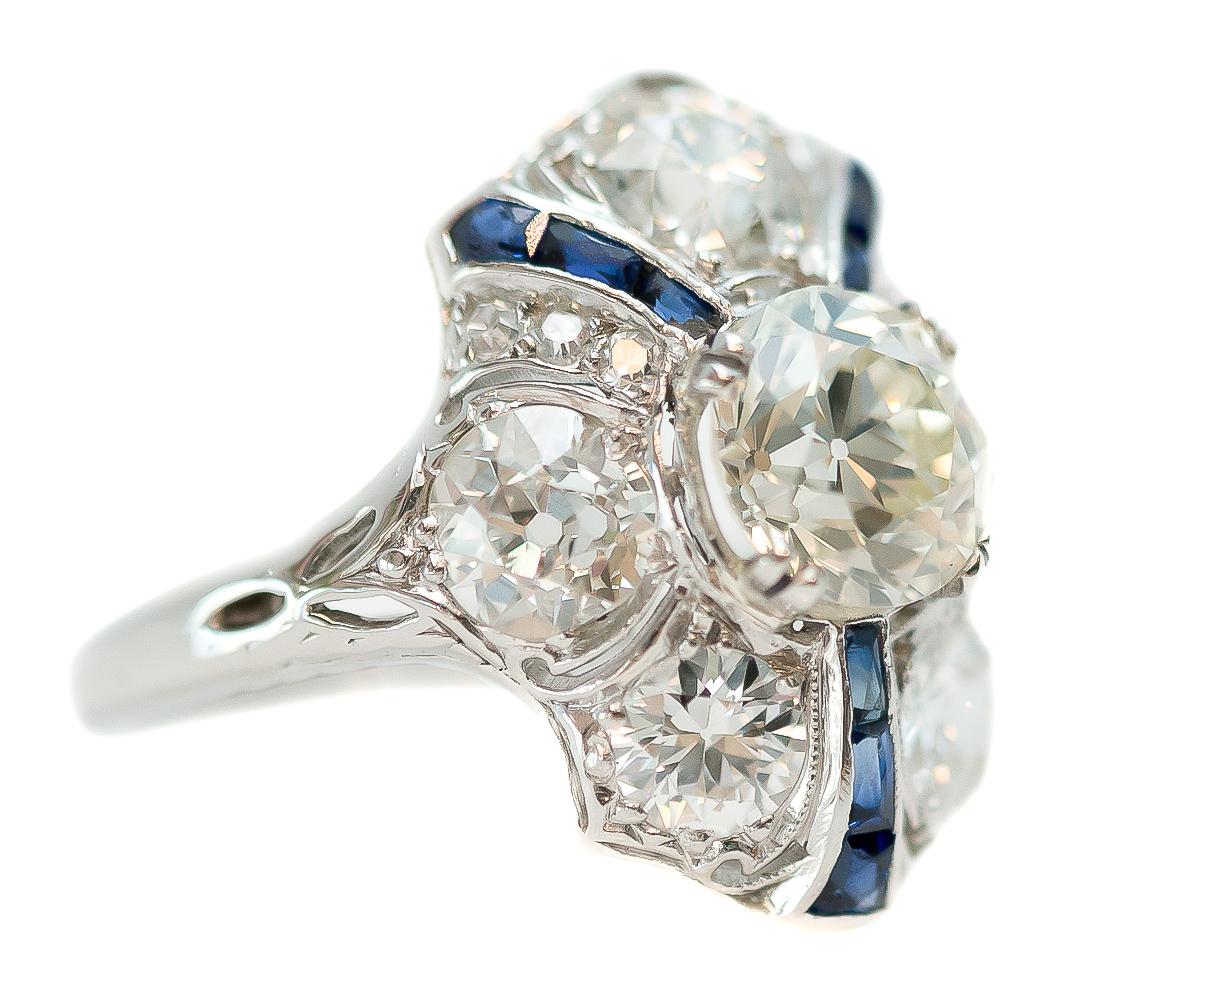 GIA 1915 Antique Diamond Engagement Ring - Platinum, Diamonds, Natural Blue Sapphire

Features:
1.07 carat Old European Brilliant Diamond Center Stone
2.23 carat total Old Miner Diamond Side Stones
6 French cut Baguette and 3 Modified French cut